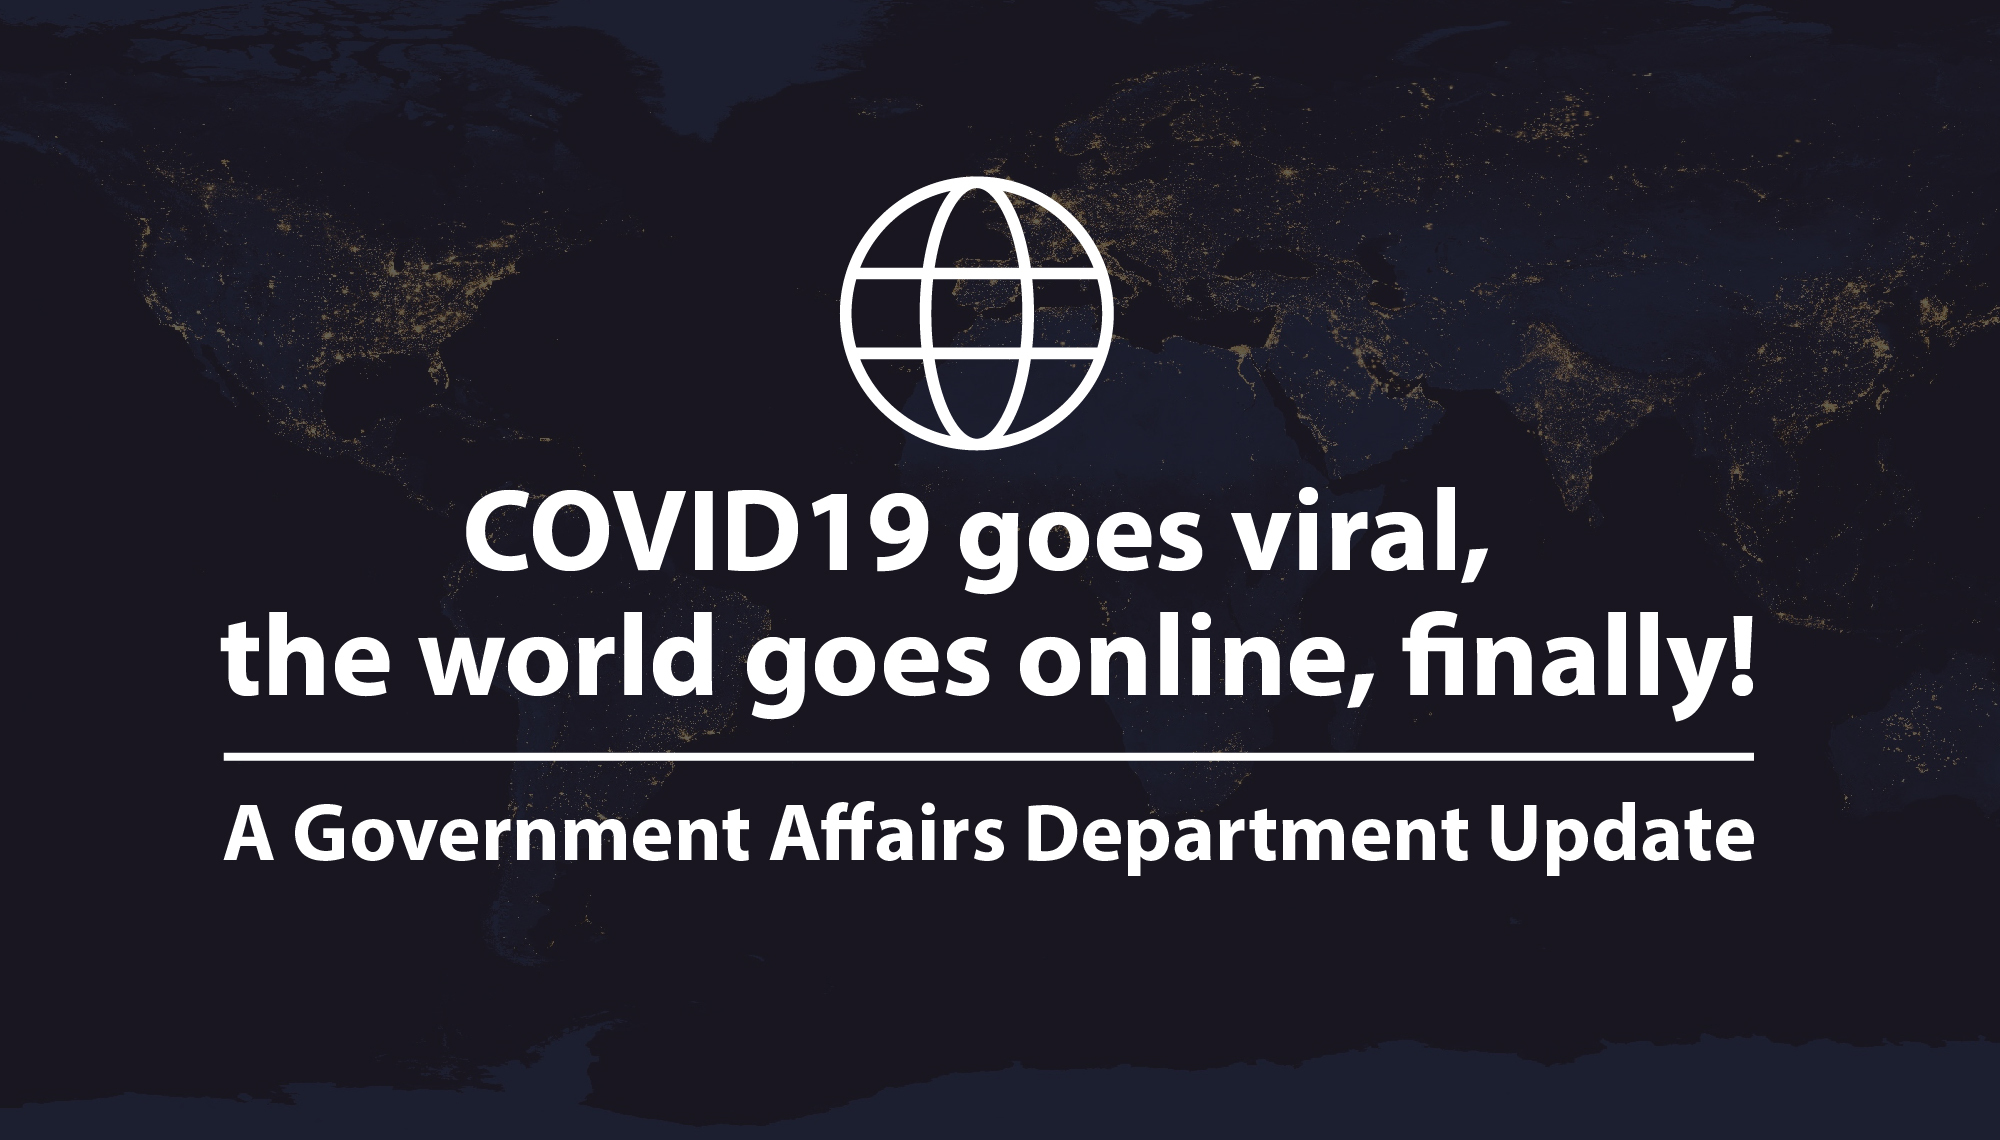 COVID19 goes viral, the world goes online, finally!